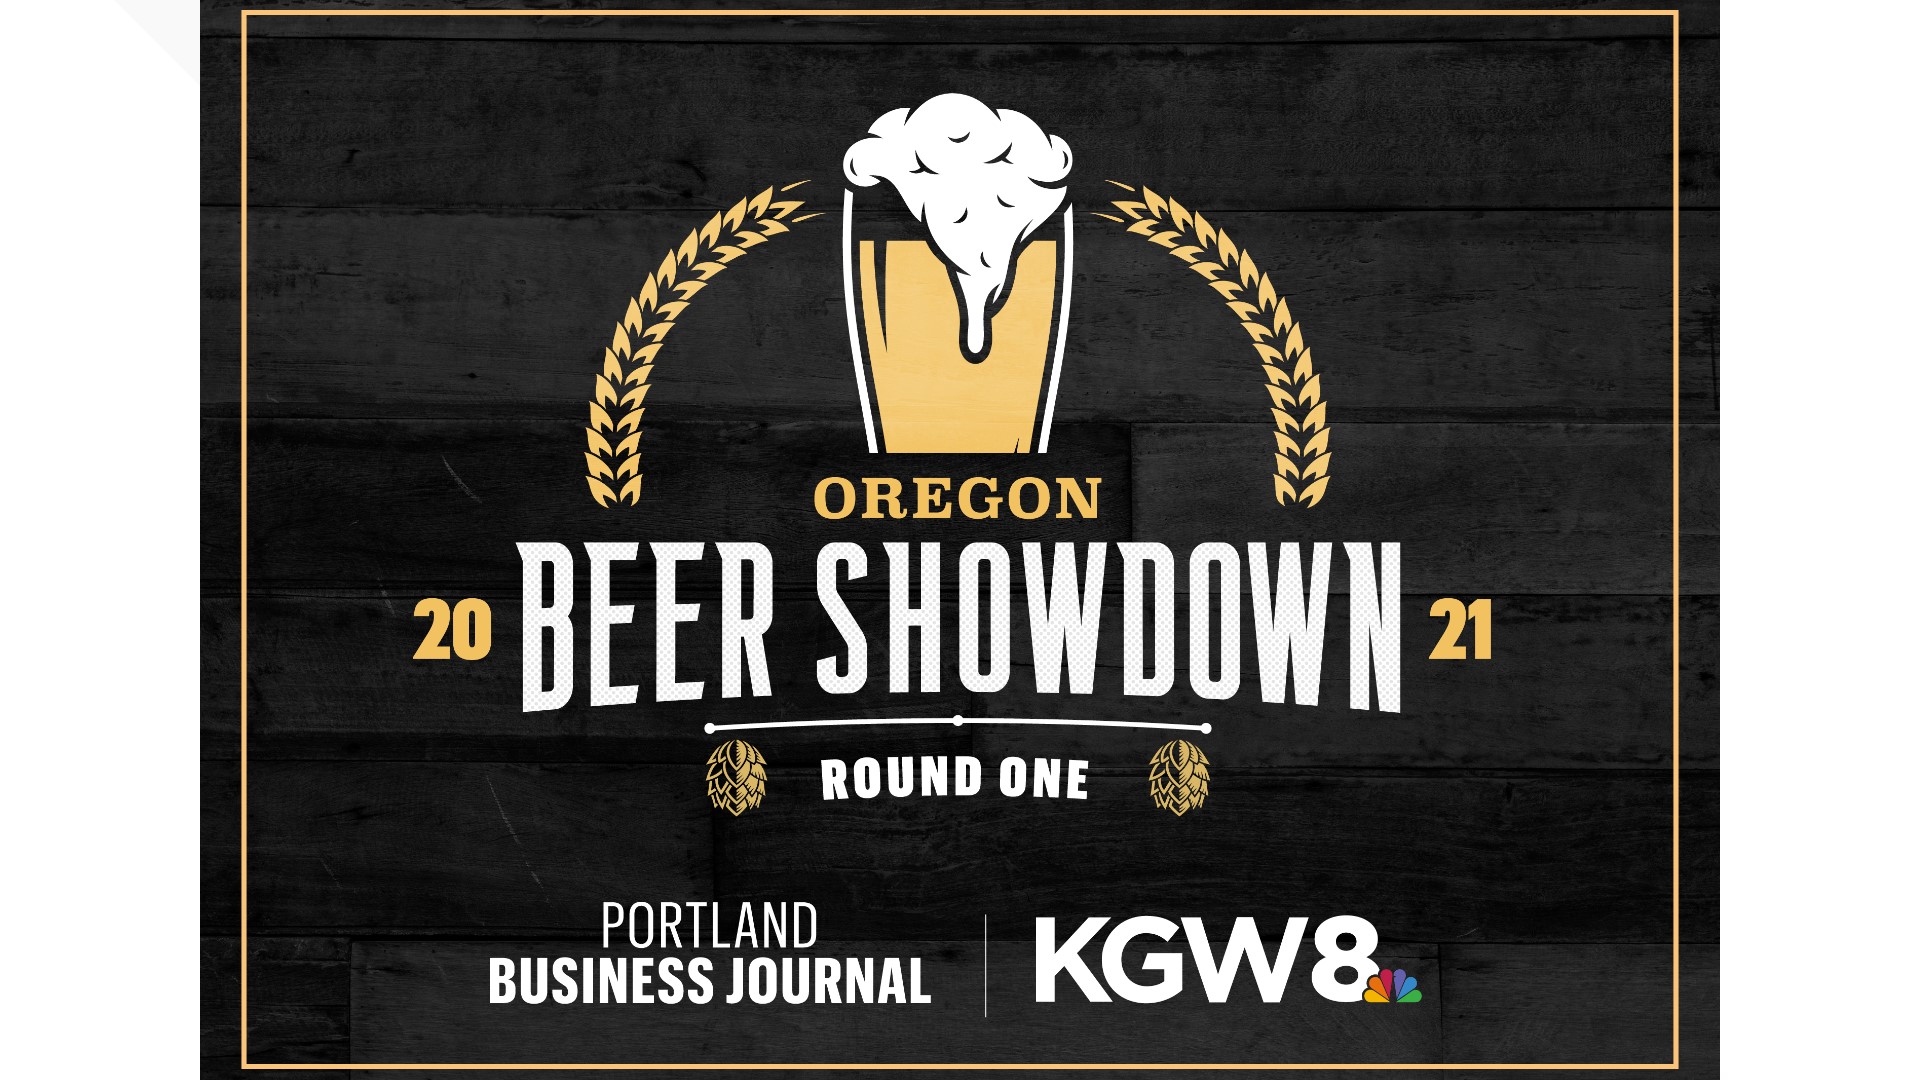 Vote for your favorite alemakers in a 64-brewery bracket. KGW and the Portland Business Journal will reveal bracket results each week when the winners are tallied.